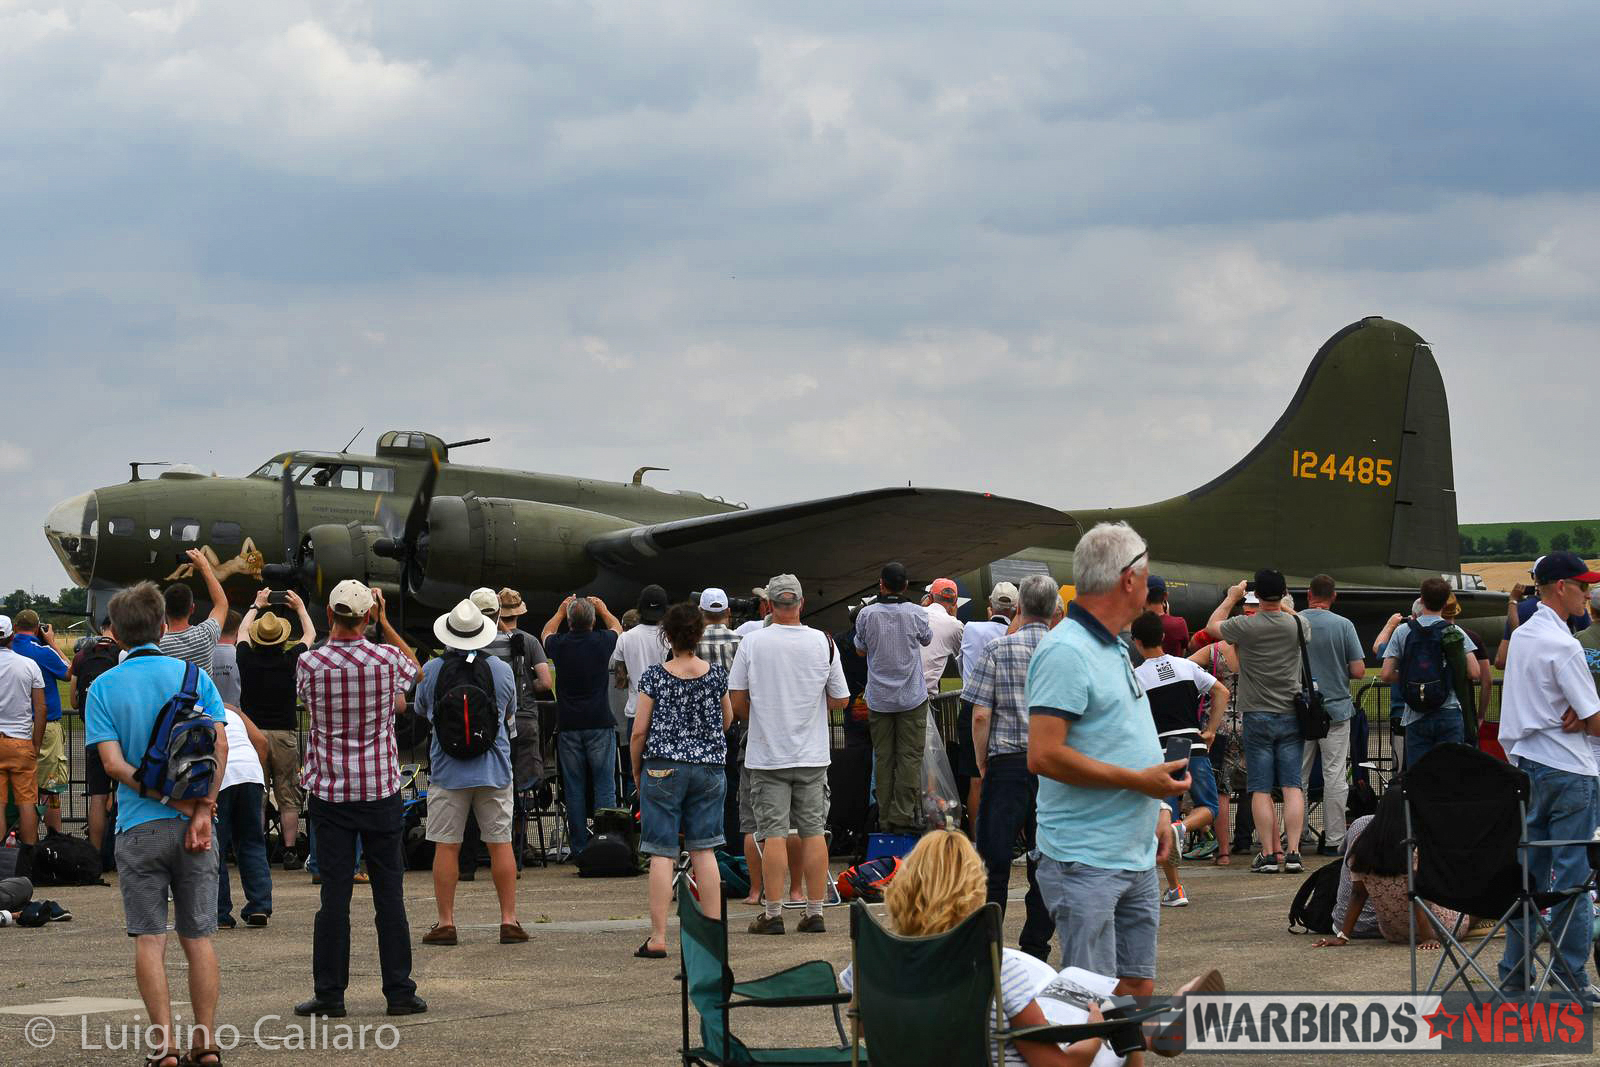 One of two B-17Gs at Duxford, "Sally-B", flew during the display. The other, Mary Alice, is on static display inside the American Air Museum building. (photo by Luigino Caliaro)